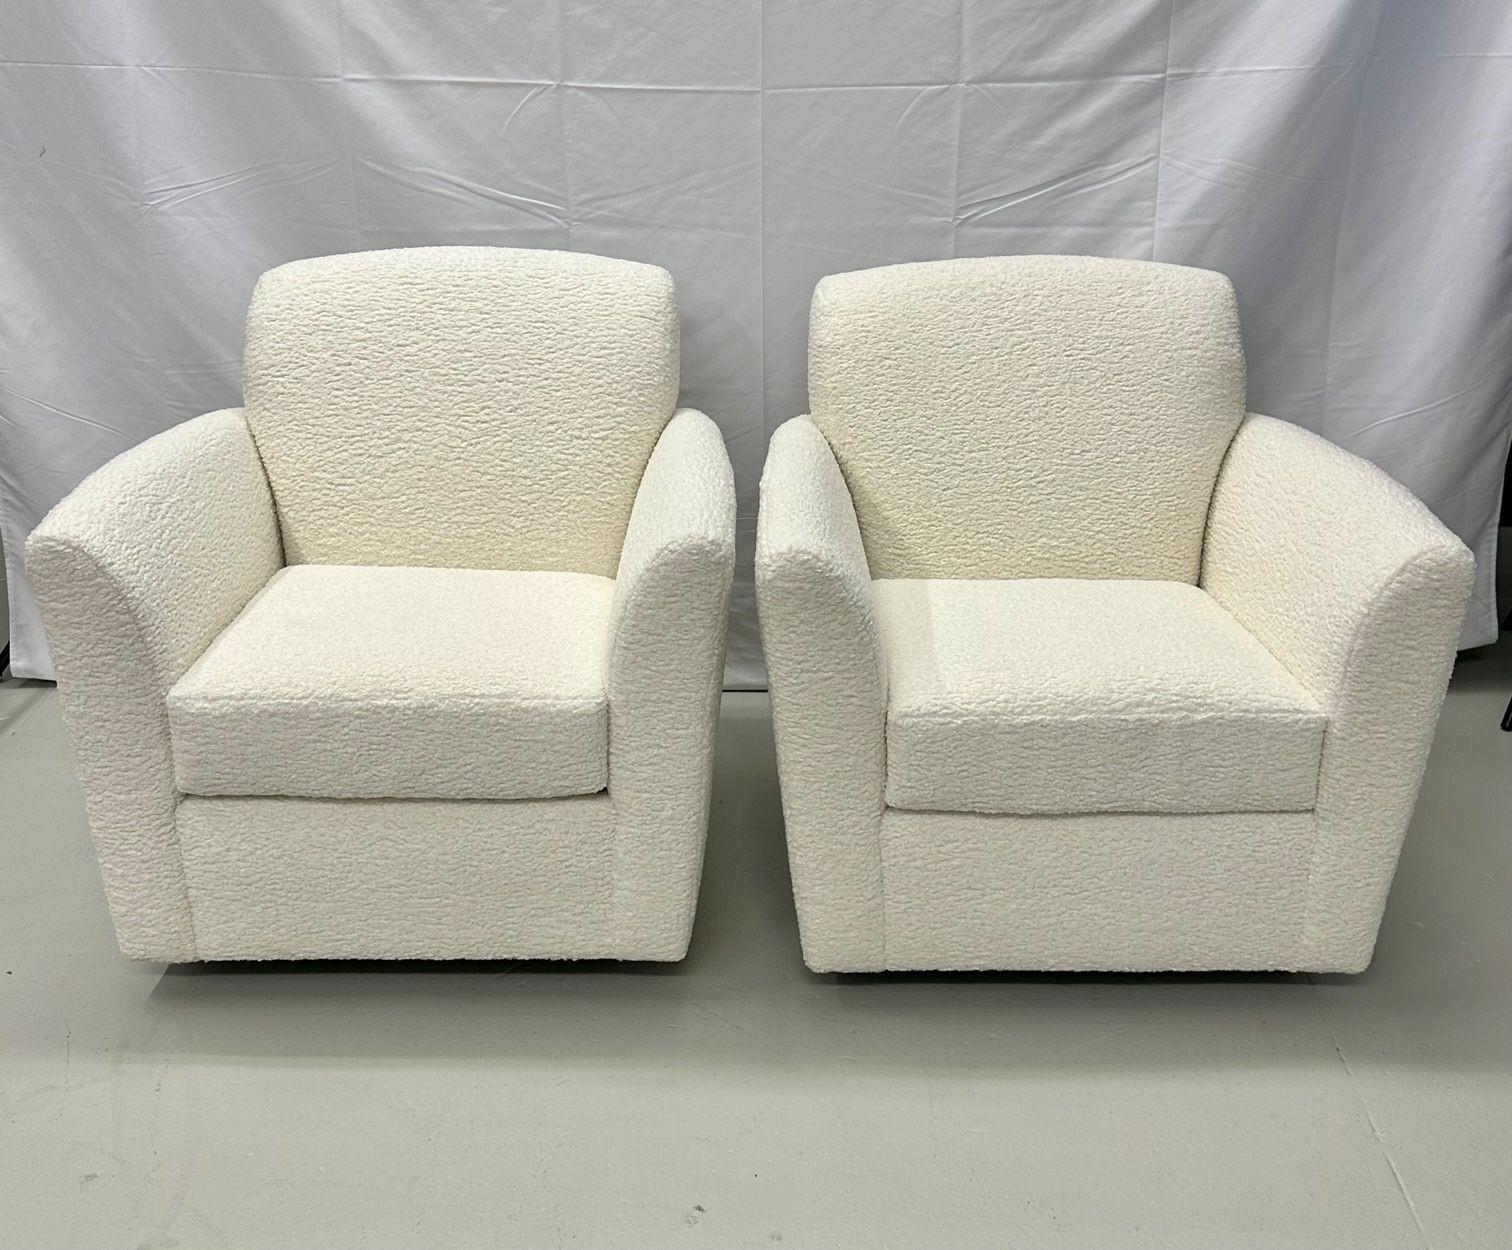 Pair of Mid-Century Modern square white boucle rocking lounge / swivel chairs

Square form chic mid-century swivel chairs newly upholstered in a luxurious, thick white boucle fabric. New cushioning. These chairs are very comfortable and have a